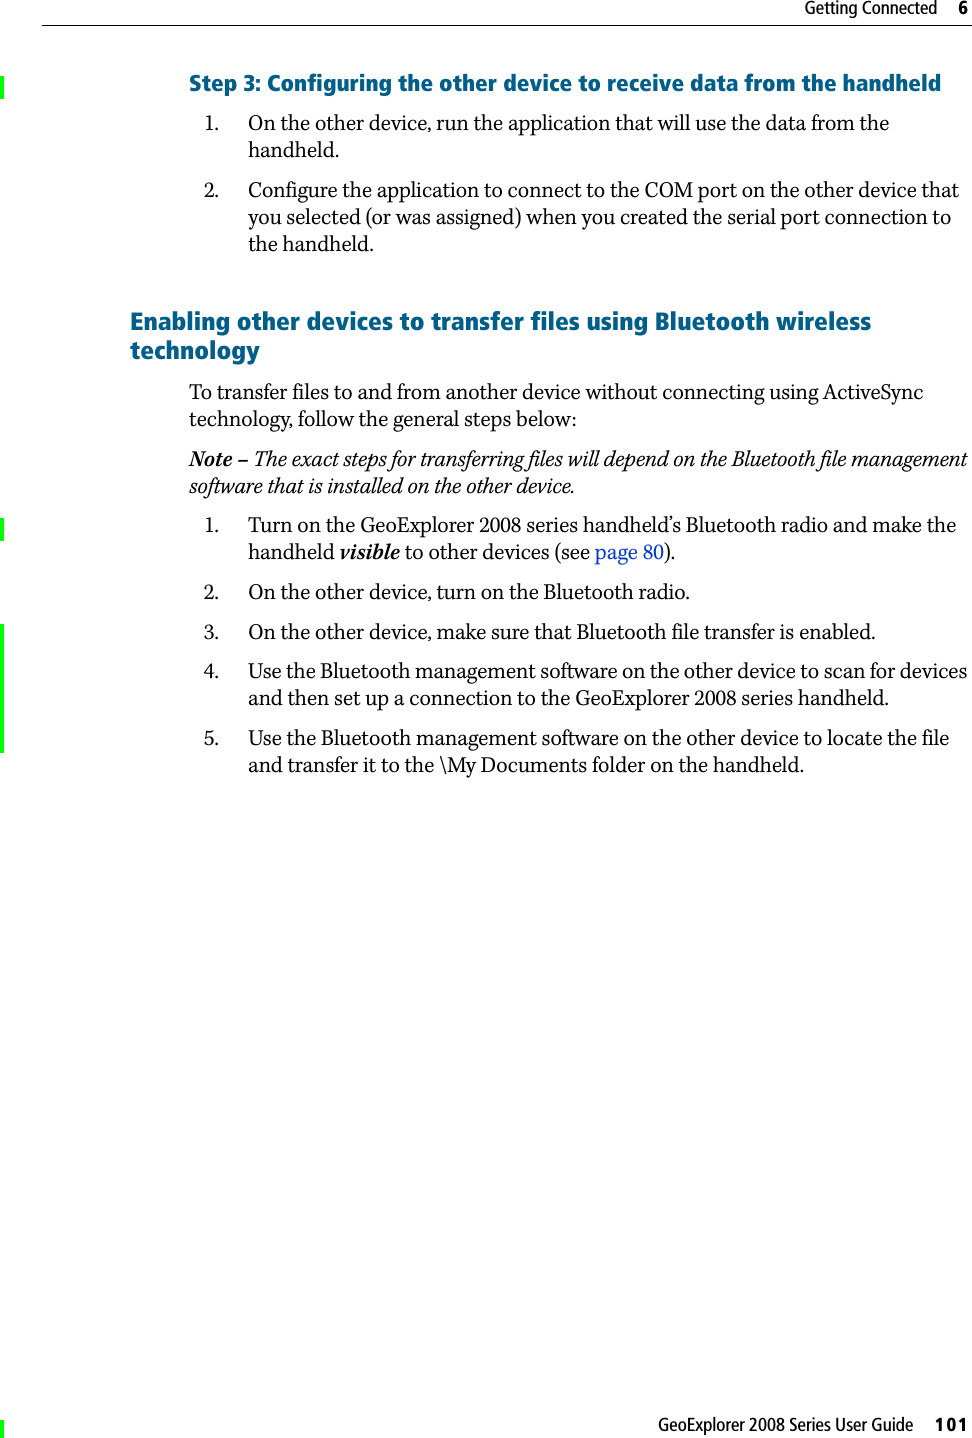 GeoExplorer 2008 Series User Guide     101Getting Connected     6Step 3: Configuring the other device to receive data from the handheld1. On the other device, run the application that will use the data from the handheld.2. Configure the application to connect to the COM port on the other device that you selected (or was assigned) when you created the serial port connection to the handheld.Enabling other devices to transfer files using Bluetooth wireless technology  To transfer files to and from another device without connecting using ActiveSync technology, follow the general steps below:Note – The exact steps for transferring files will depend on the Bluetooth file management software that is installed on the other device.1. Turn on the GeoExplorer 2008 series handheld’s Bluetooth radio and make the handheld visible to other devices (see page 80).2. On the other device, turn on the Bluetooth radio.3. On the other device, make sure that Bluetooth file transfer is enabled. 4. Use the Bluetooth management software on the other device to scan for devices and then set up a connection to the GeoExplorer 2008 series handheld. 5. Use the Bluetooth management software on the other device to locate the file and transfer it to the \My Documents folder on the handheld.